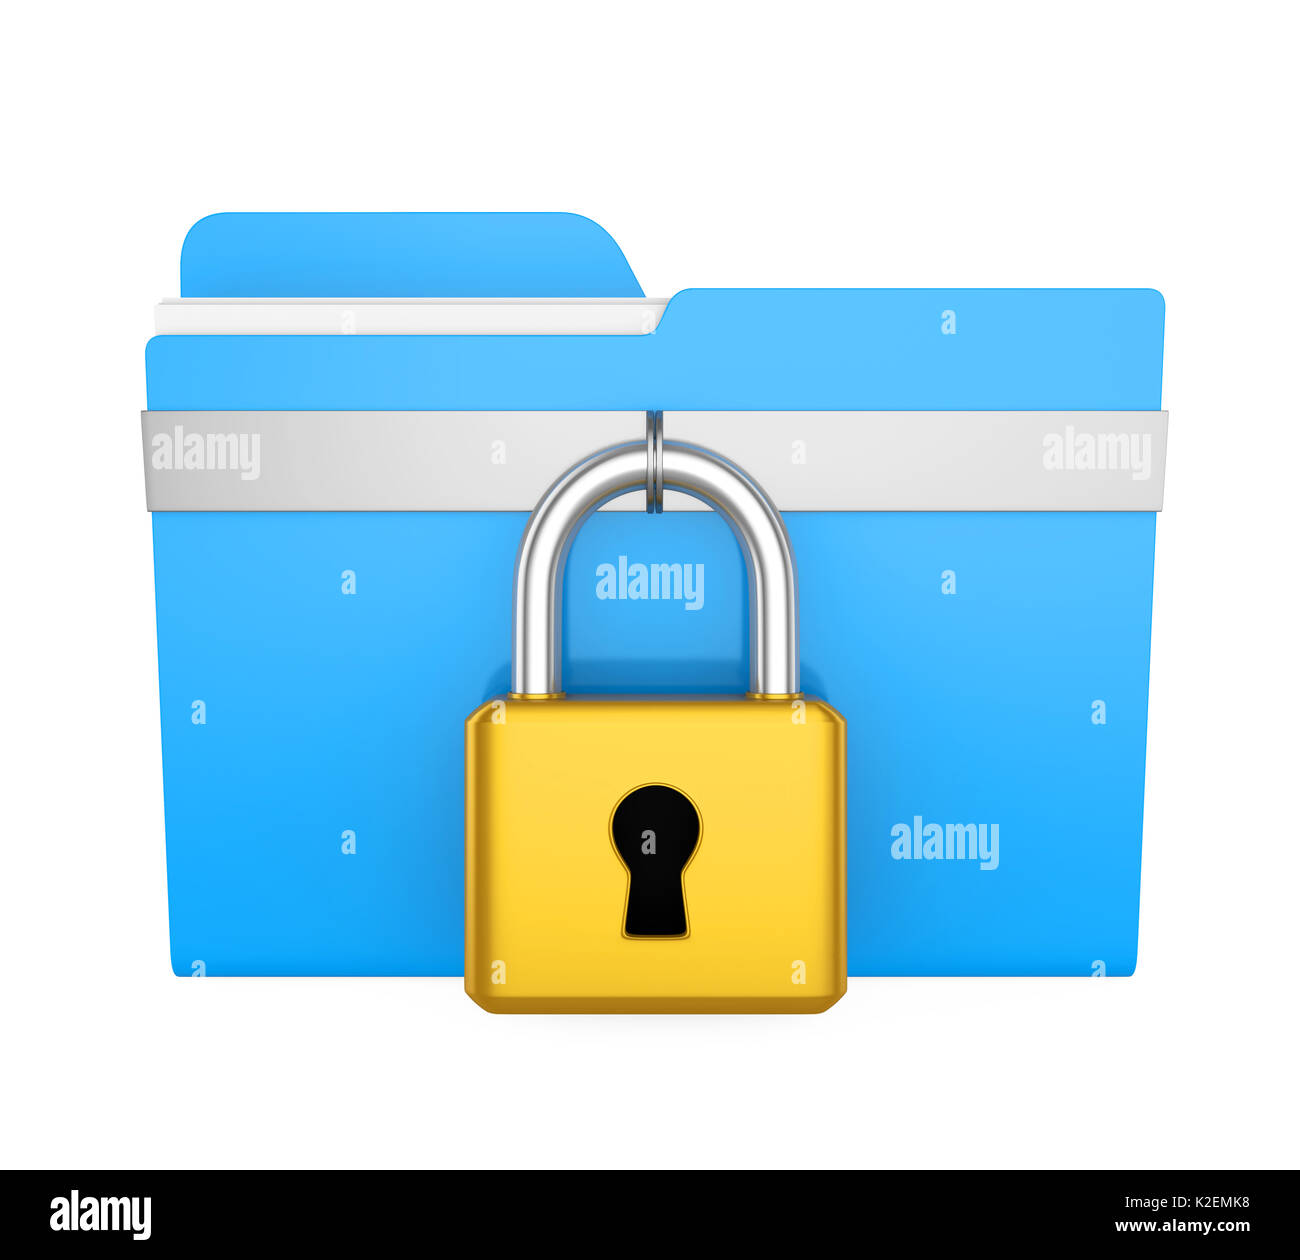 Computer Folder and Lock Isolated Stock Photo